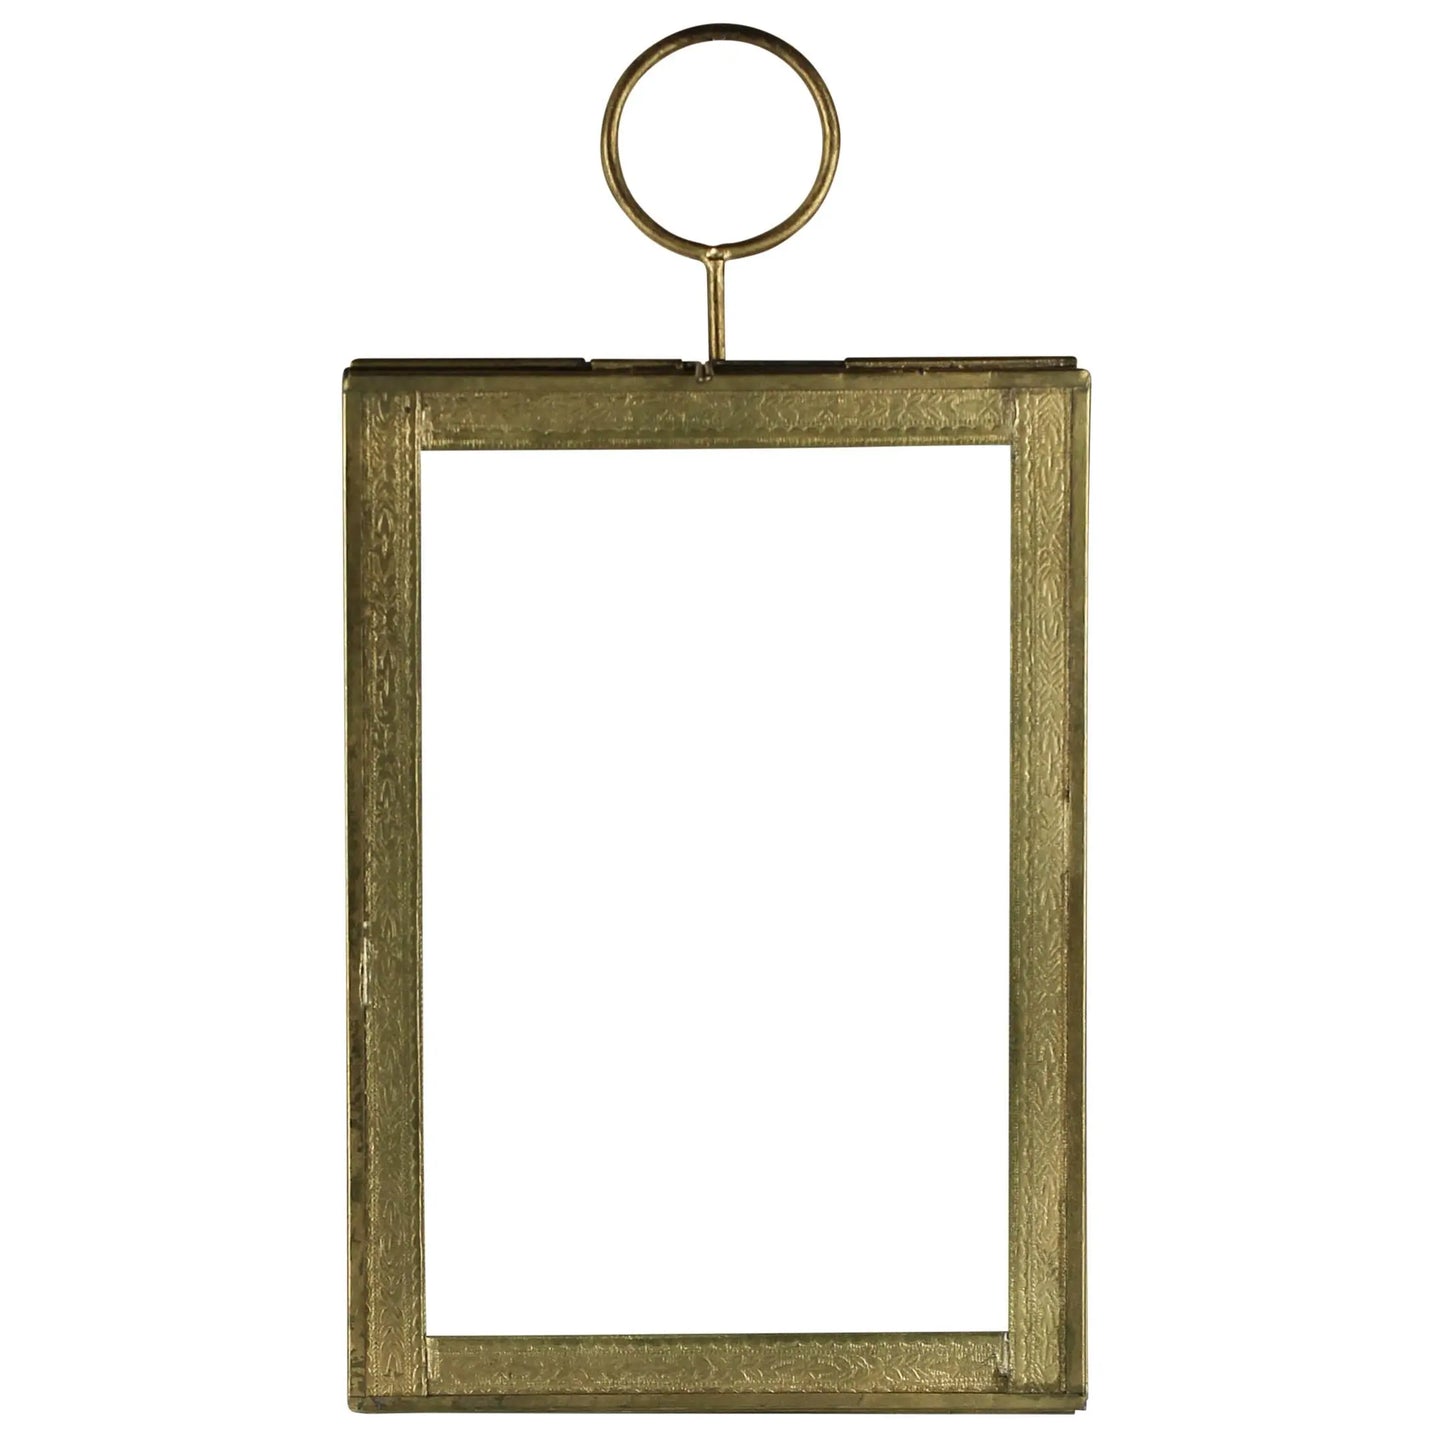 Hans Hanging Frame, Brass - 5x7 Niko and Me Home Decor